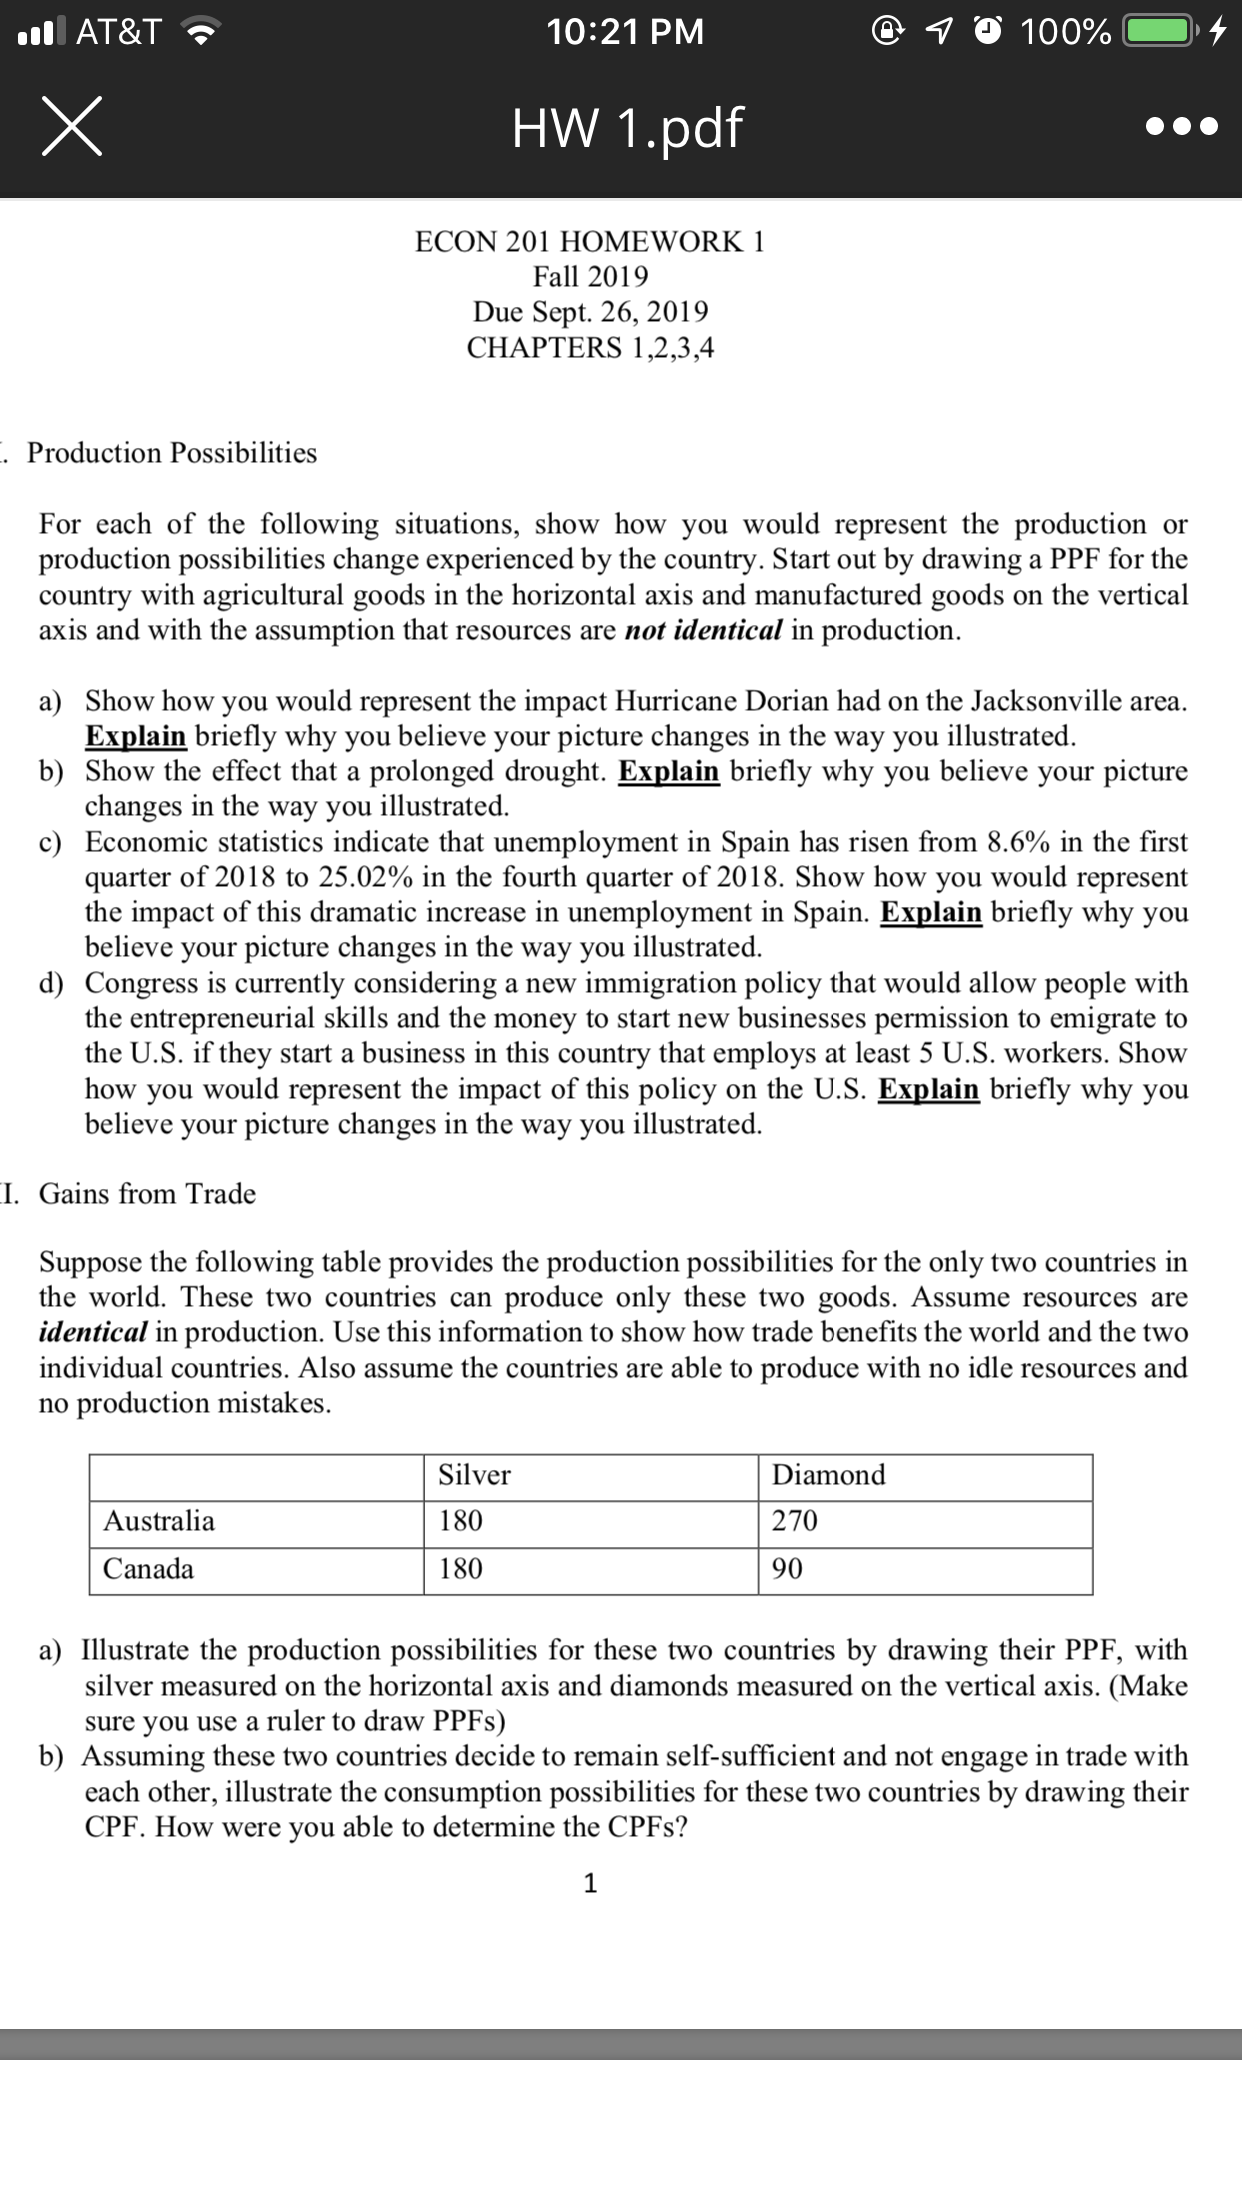 @ 10 100%
10:21 PM
l AT&T
HW 1.pdf
ECON 201 HOMEWORK 1
Fall 2019
Due Sept. 26, 2019
CHAPTERS 1,2,3,4
. Production Possibilities
For each of the following situations, show how you would represent the production
production possibilities change experienced by the country. Start out by drawing a PPF for the
country with agricultural goods in the horizontal axis and manufactured goods on the vertical
axis and with the assumption that resources are not identical in production
or
a) Show how you would represent the impact Hurricane Dorian had on the Jacksonville area
Explain briefly why you believe your picture changes in the way you illustrated
b) Show the effect that a prolonged drought. Explain briefly why you believe your picture
changes in the way you illustrated.
c) Economic statistics indicate that unemployment in Spain has risen from 8.6% in the first
quarter of 2018 to 25.02% in the fourth quarter of 2018. Show how you would represent
the impact of this dramatic increase in unemployment in Spain. Explain briefly why you
believe your picture changes in the way you illustrated
d) Congress is currently considering a new immigration policy that would allow people with
the entrepreneurial skills and the money to start new businesses permission to emigrate to
the U.S. if they start a business in this country that employs at least 5 U.S. workers. Show
how you would represent the impact of this policy
believe your picture changes in the way you illustrated
on the U.S. Explain briefly why you
I. Gains from Trade
Suppose the following table provides the production possibilities for the only two countries in
the world. These two countries can
produce only these two goods. Assume resources are
identical in production. Use this information to show how trade benefits the world and the two
individual countries. Also assume the countries are able to produce with no idle resources and
no production mistakes.
Silver
Diamond
Australia
270
180
Canada
180
90
a) Illustrate the production possibilities for these two countries by drawing their PPF, with
silver measured on the horizontal axis and diamonds measured on the vertical axis. (Make
sure you use a ruler to draw PPF8)
b) Assuming these two countries decide to remain self-sufficient and not engage in trade with
each other, illustrate the consumption possibilities for these two countries by drawing their
CPF. How were you able to determine the CPF8?
1
